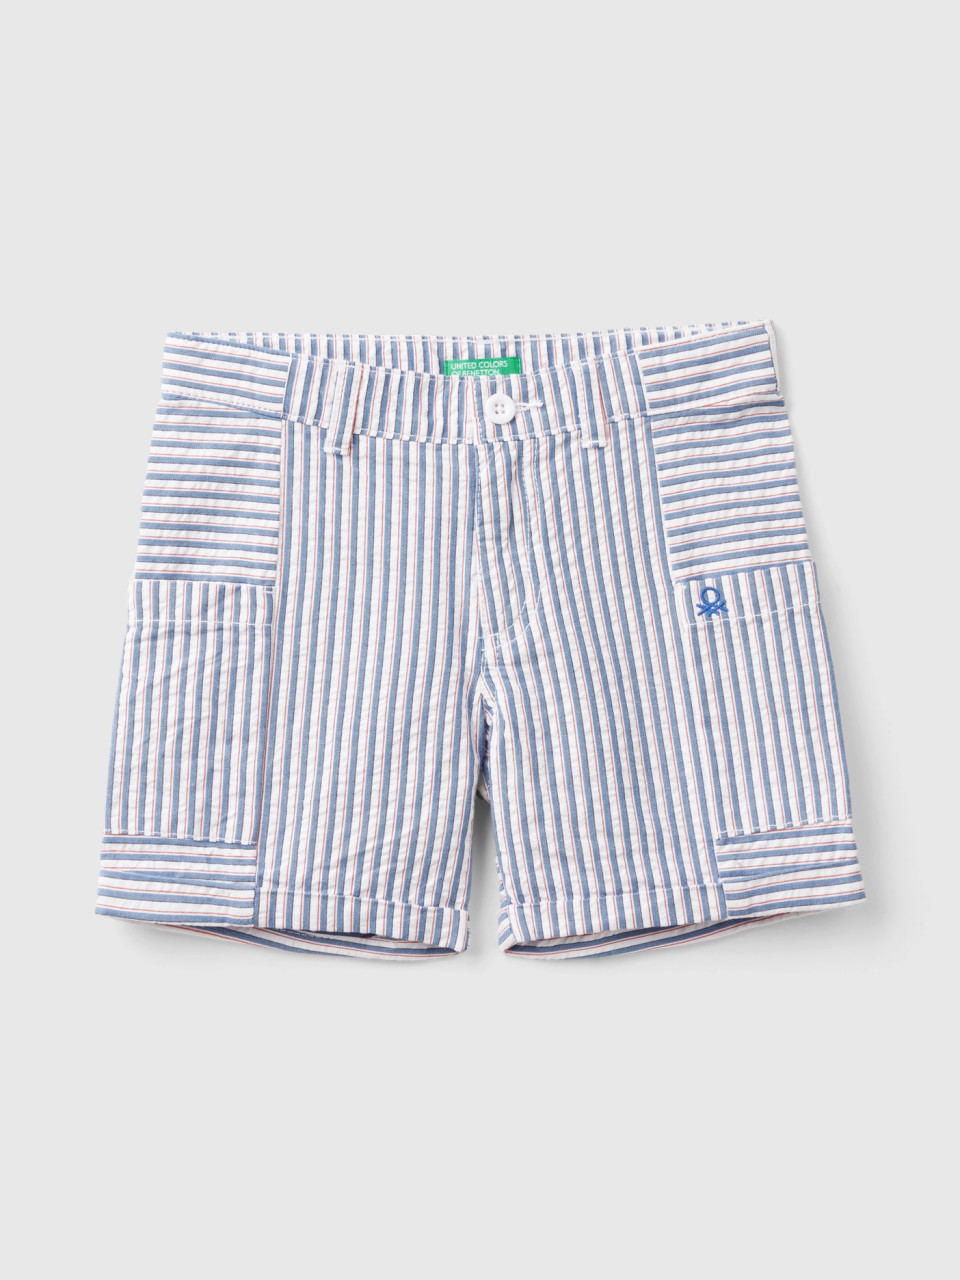 Benetton, Striped Shorts With Pockets, Multi-color, Kids